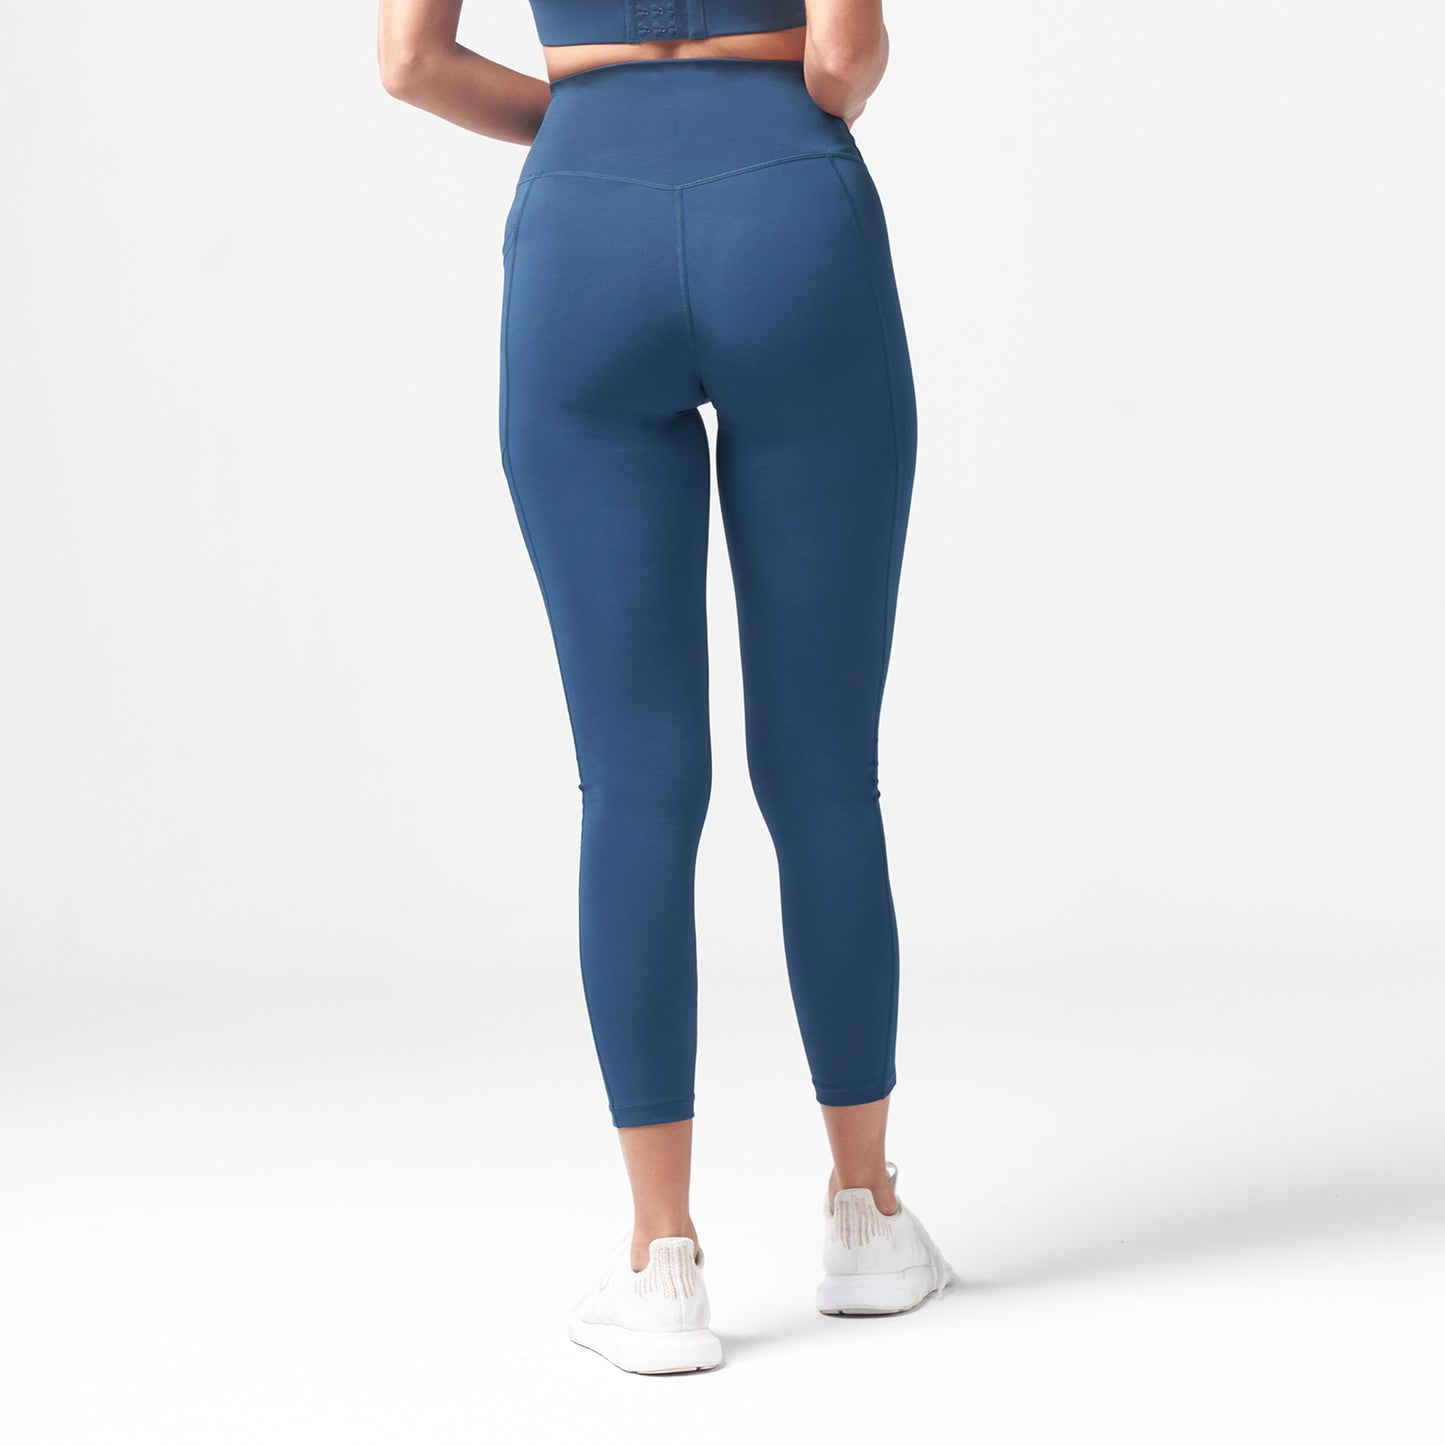 squatwolf-workout-clothes-essential-cropped-leggings-teal-gym-leggings-for-women